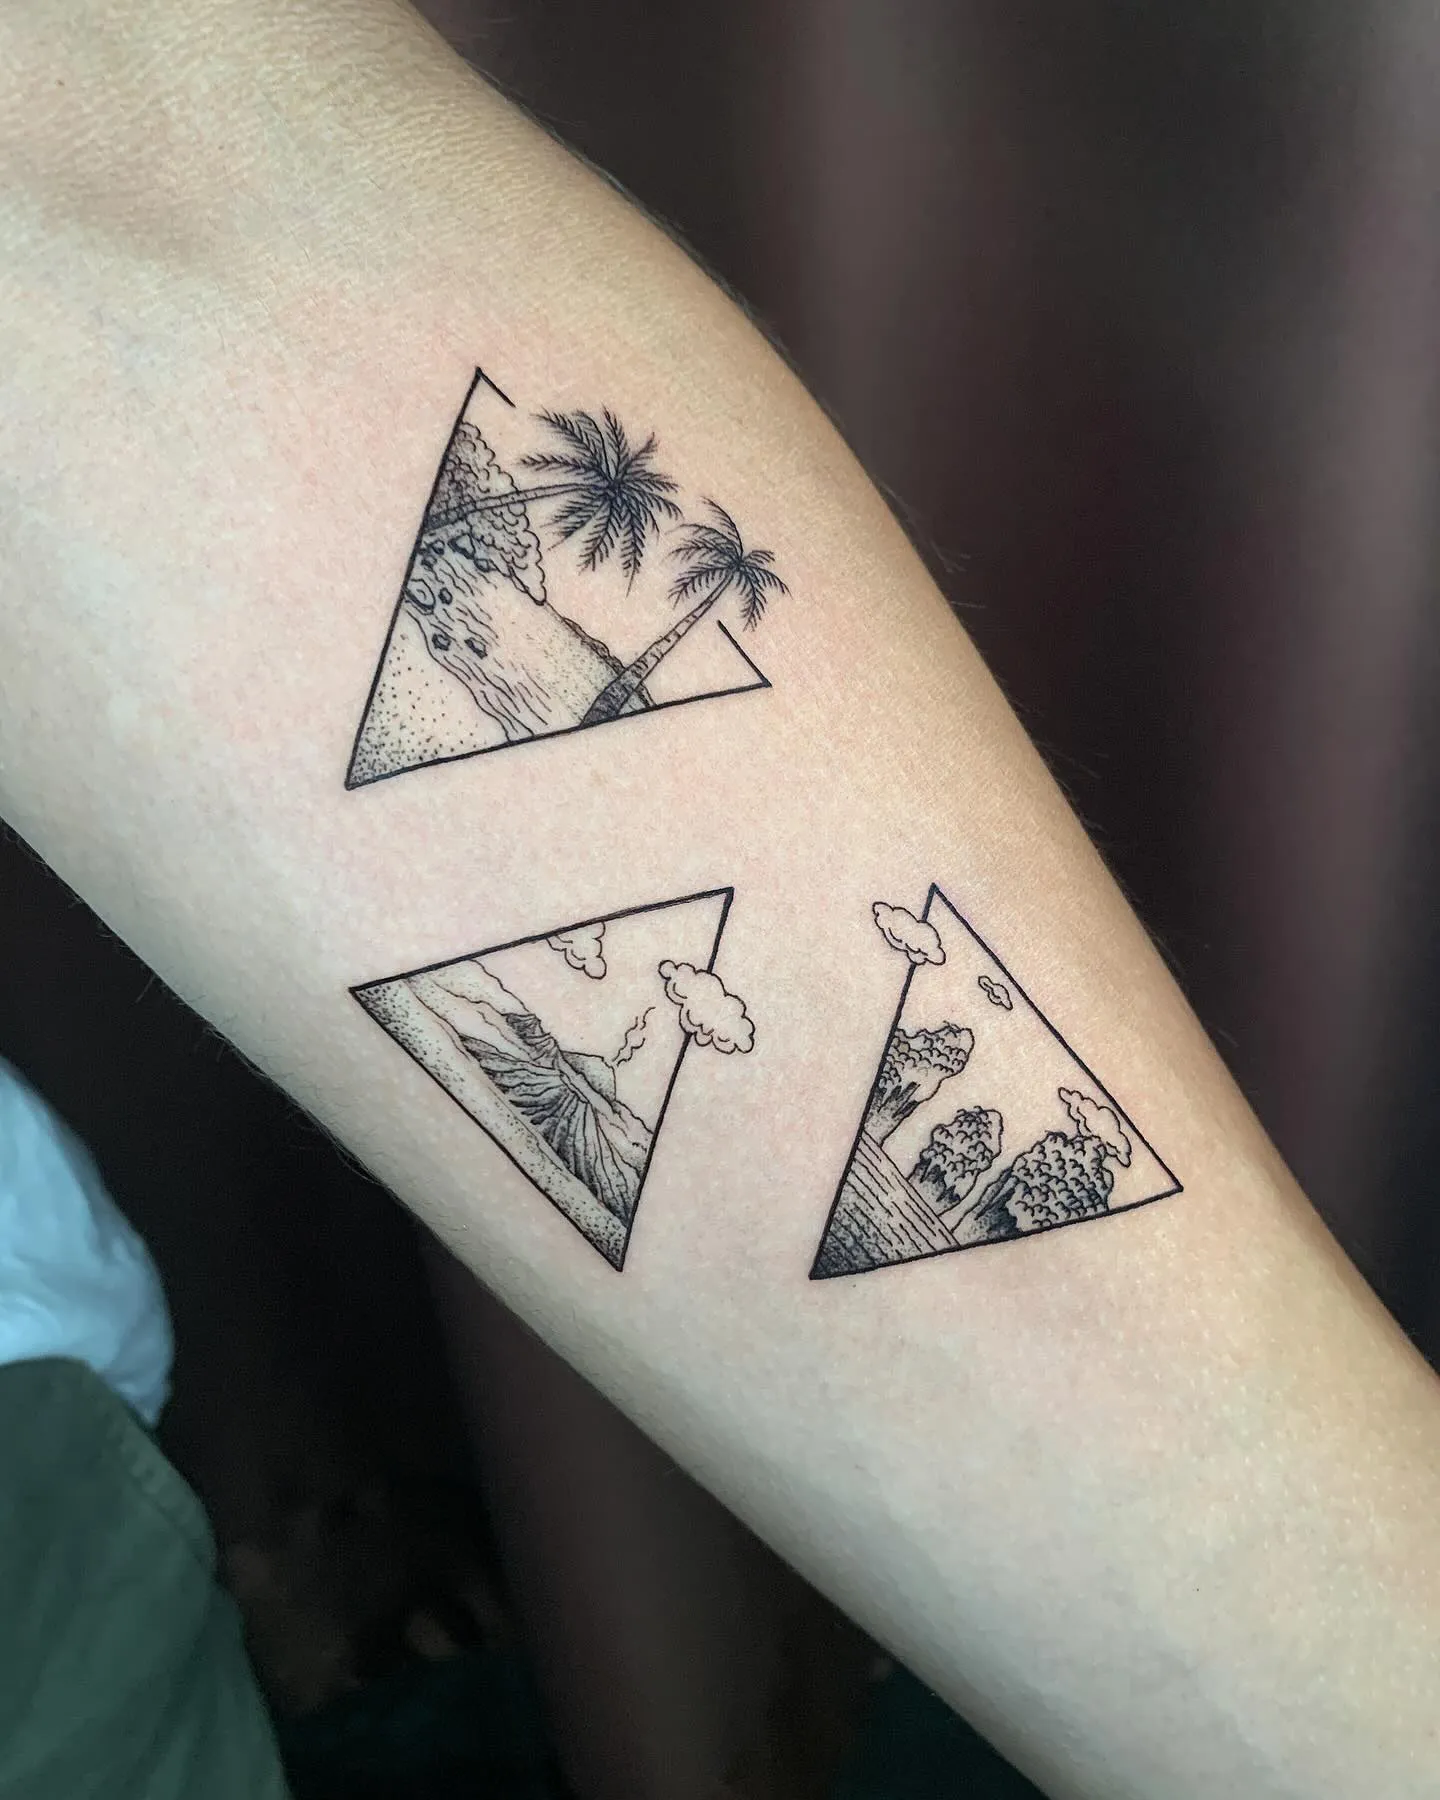 Artistic Landscape within Triangle Tattoos on Arm